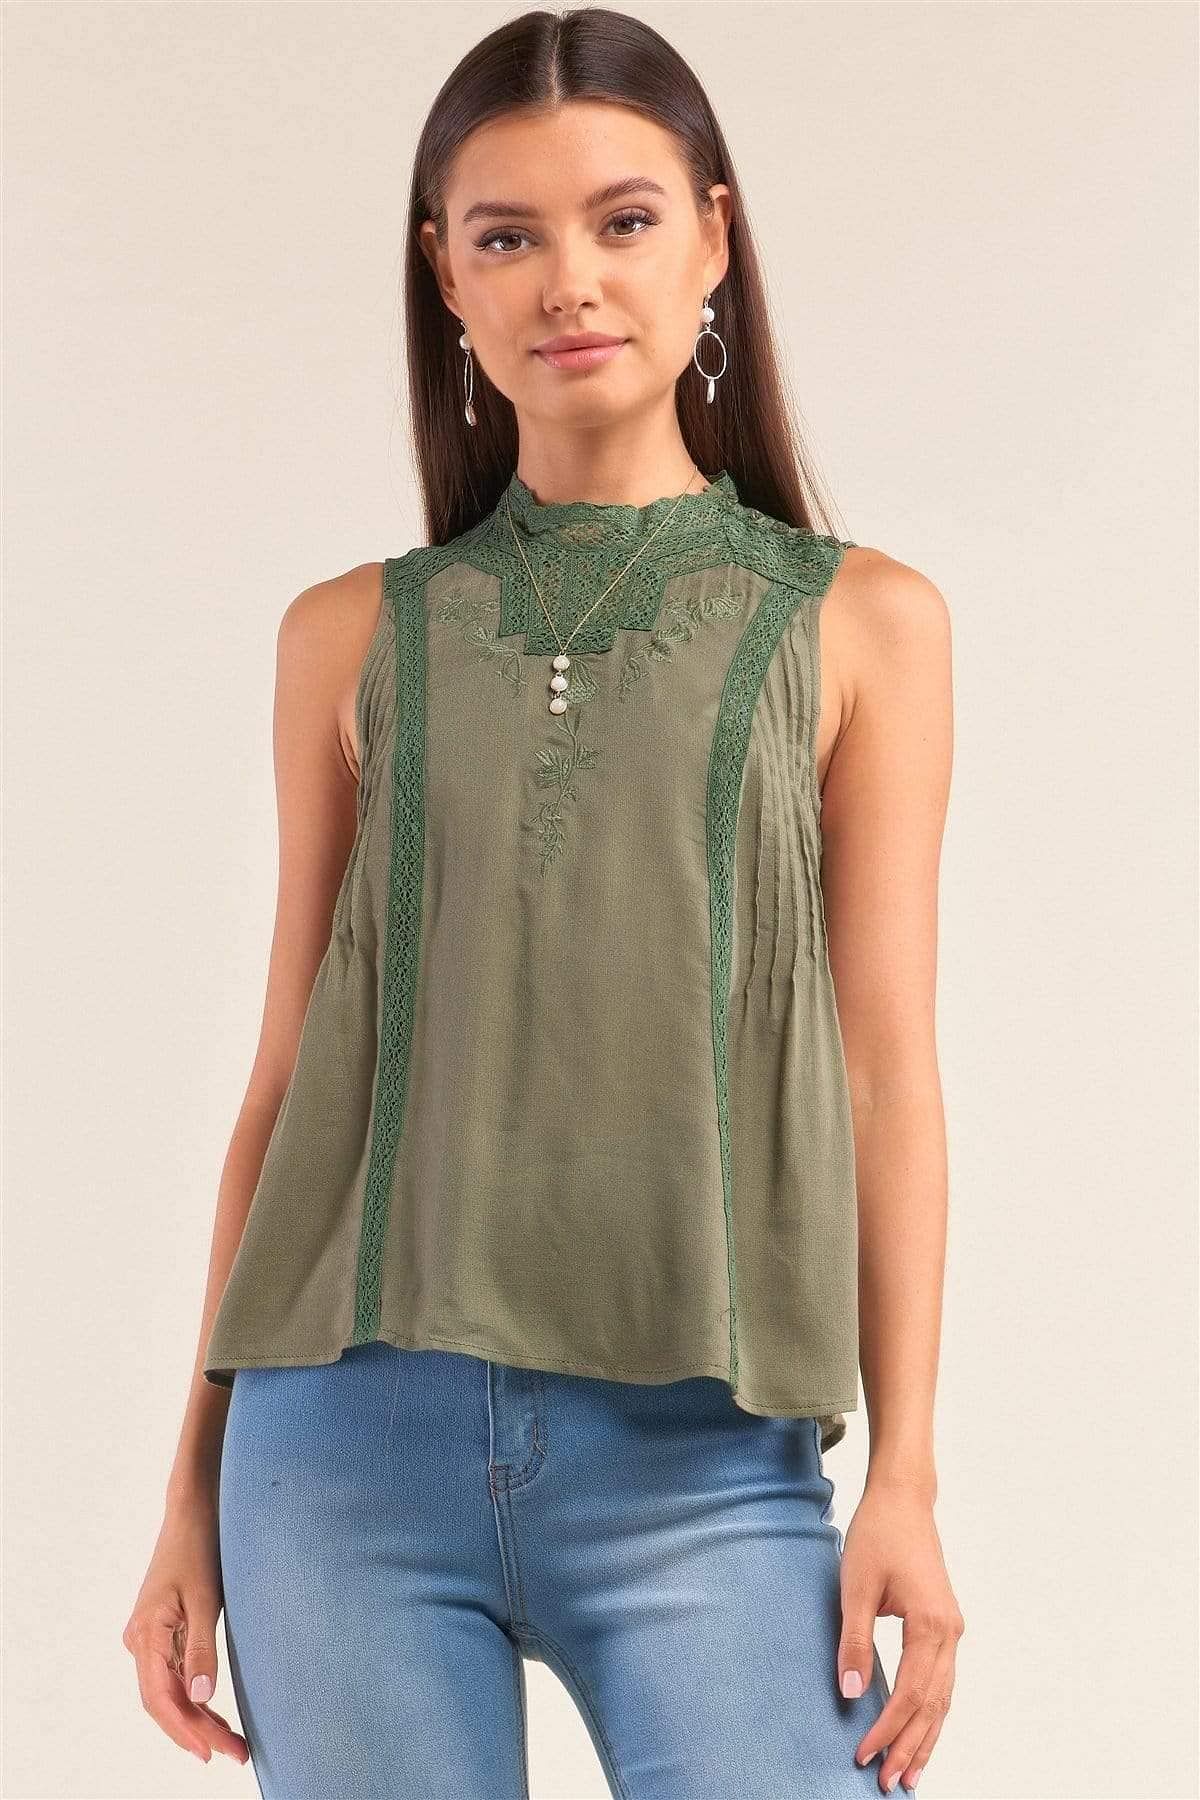 Green Sleeveless Crochet Embroidered Top - Shopping Therapy XS Top